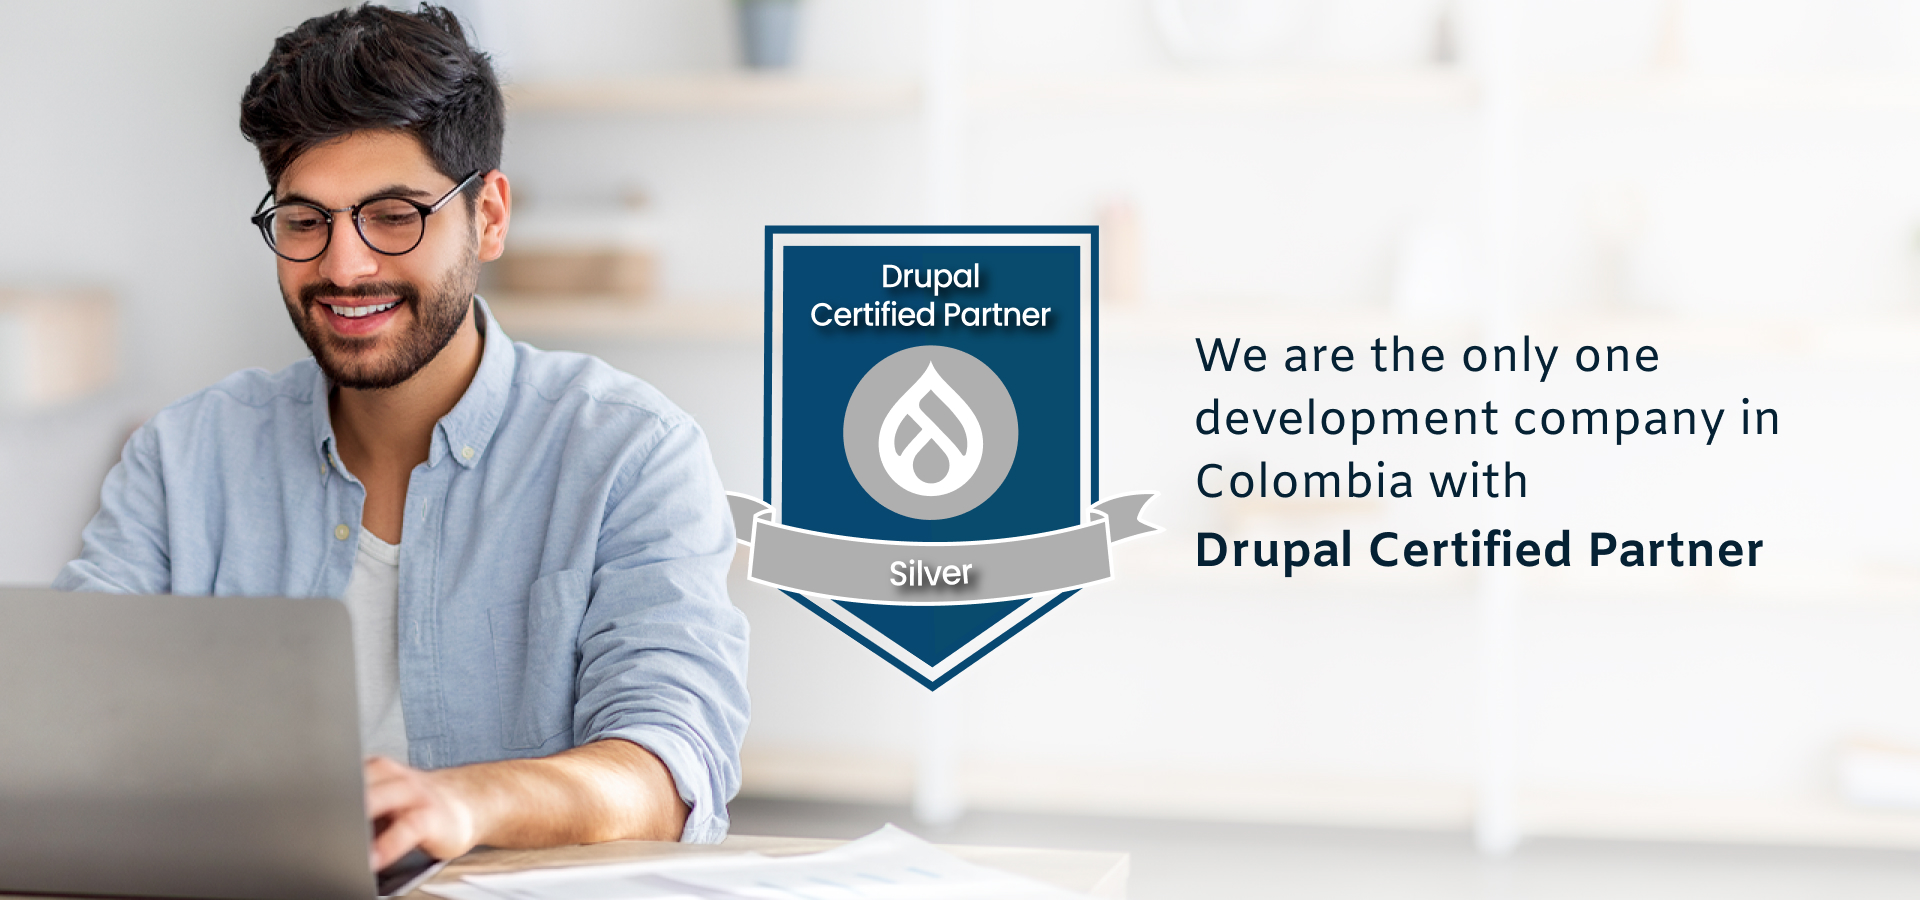 Image that contains the text: We are the only one development company in Colombia with  Drupal Certified Partner